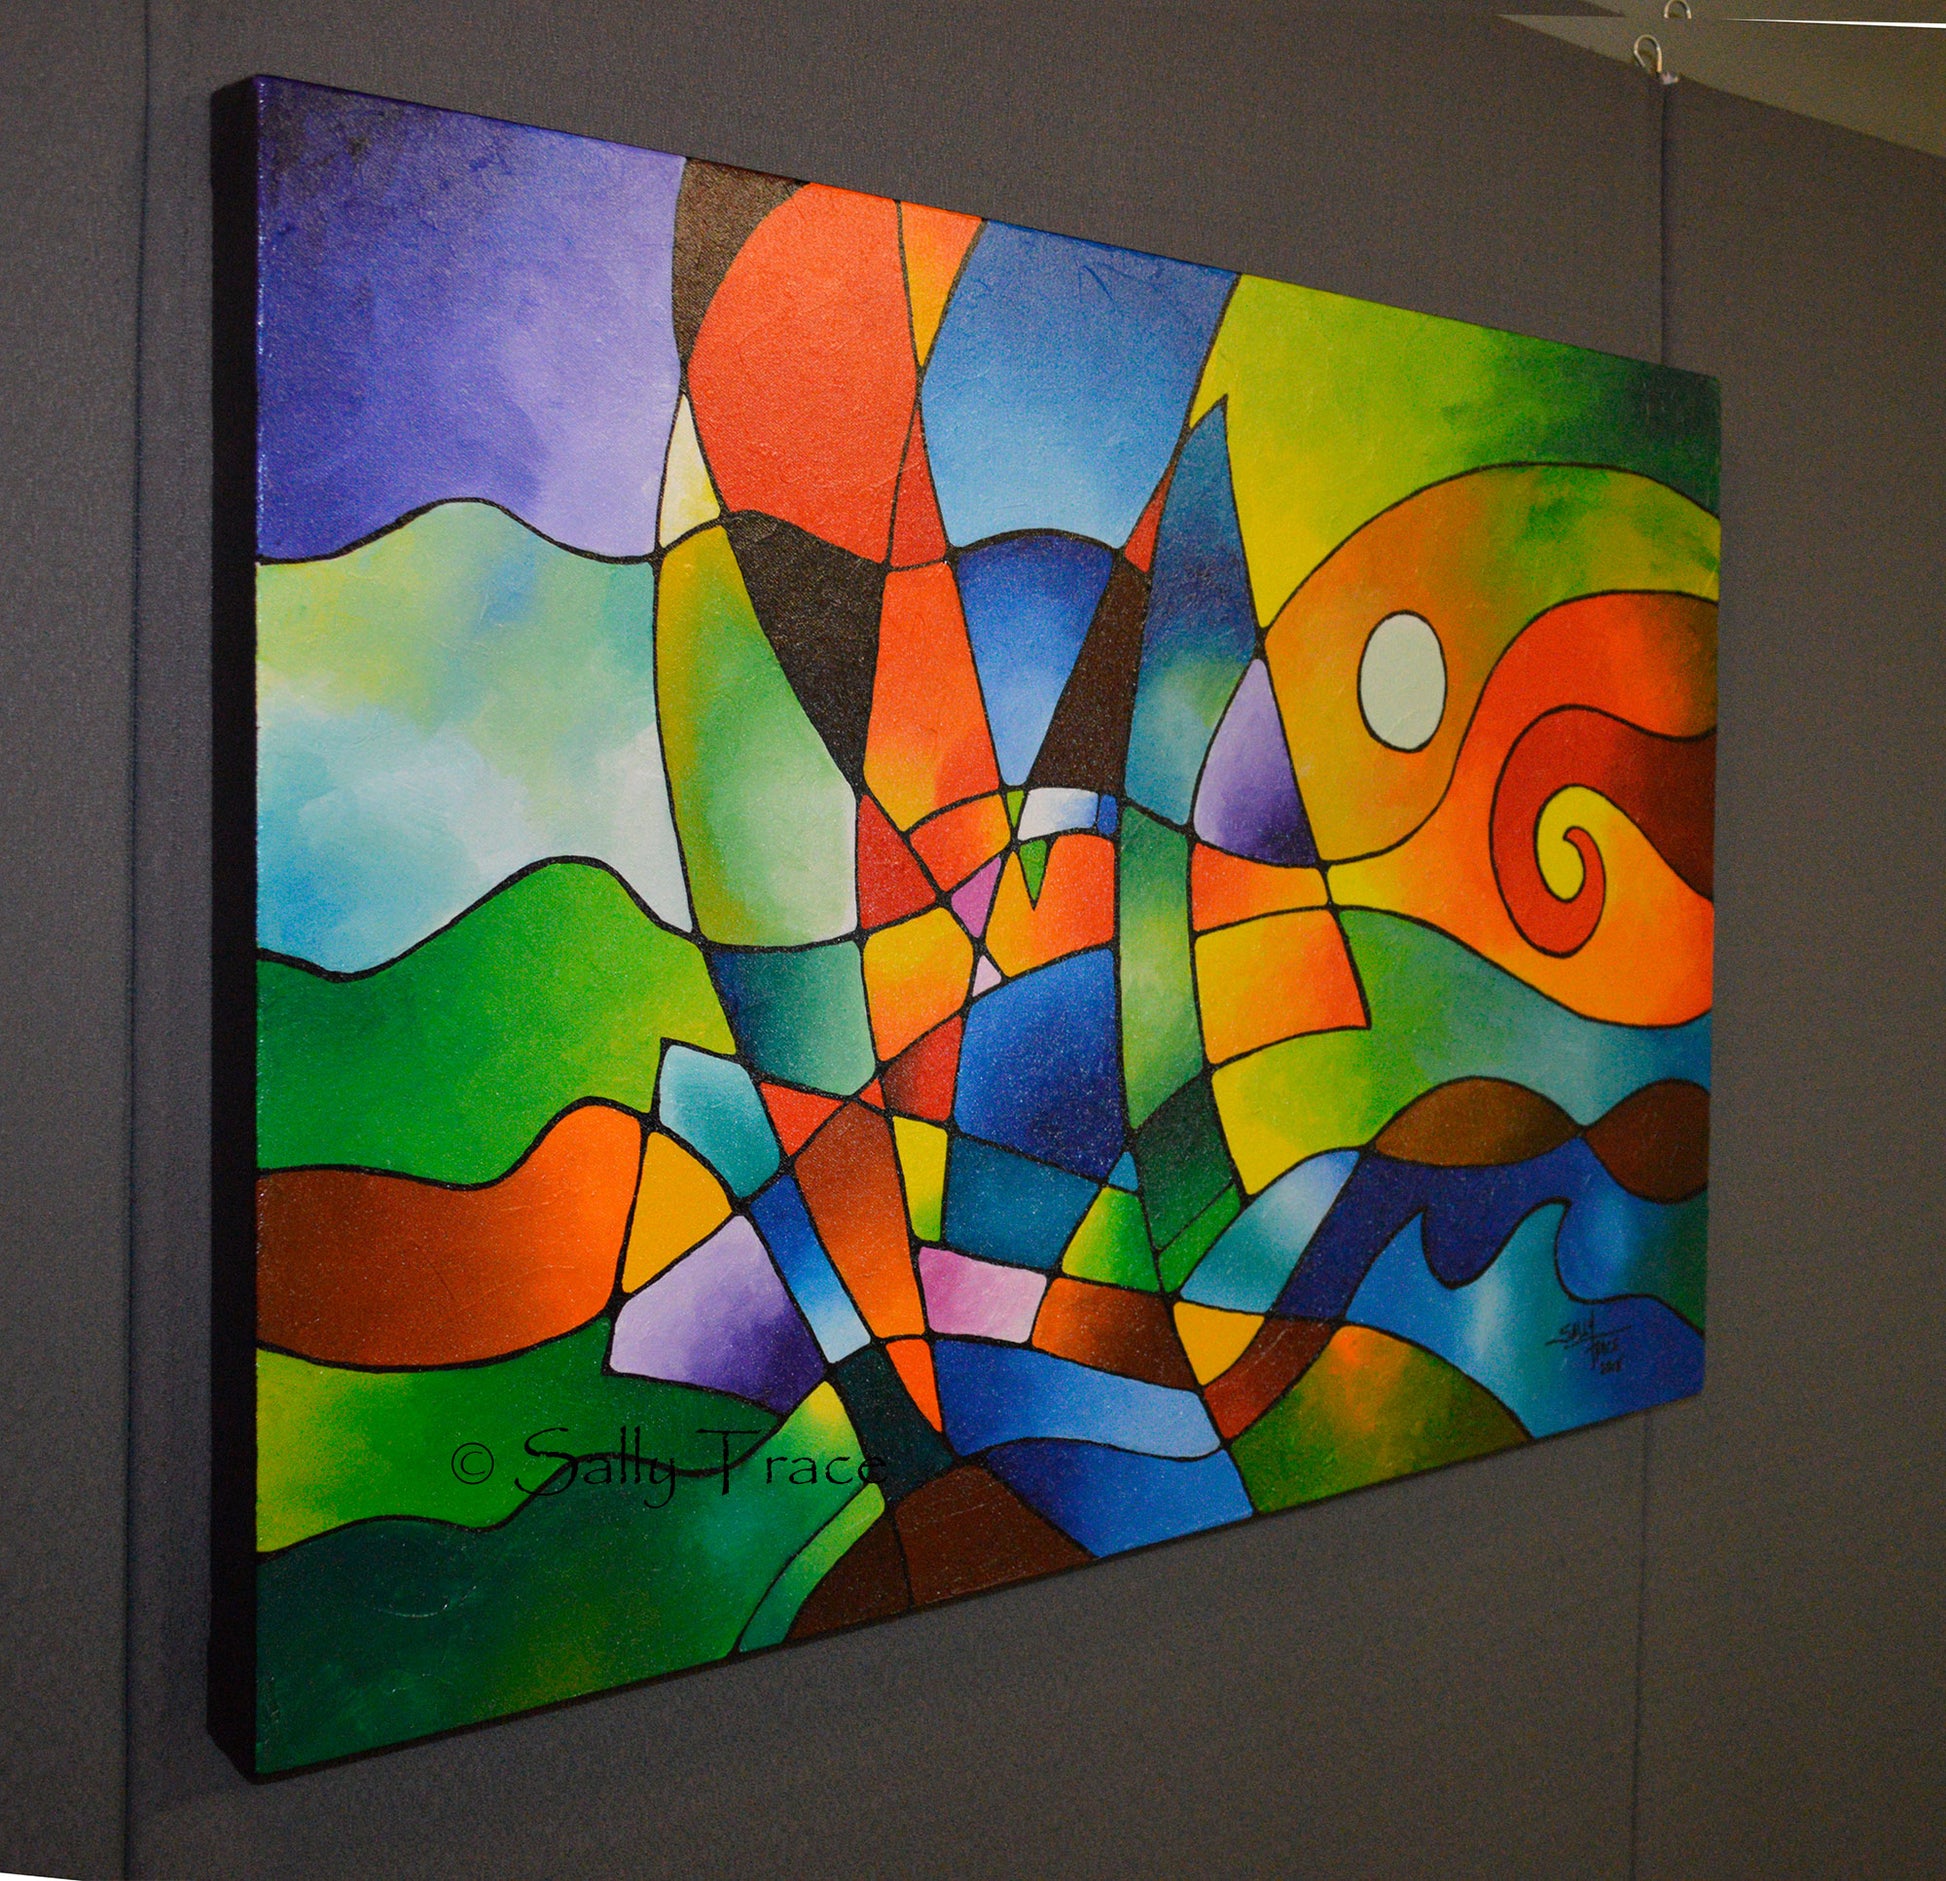 Modern geometric art painting "Into the Wind" by Sally Trace